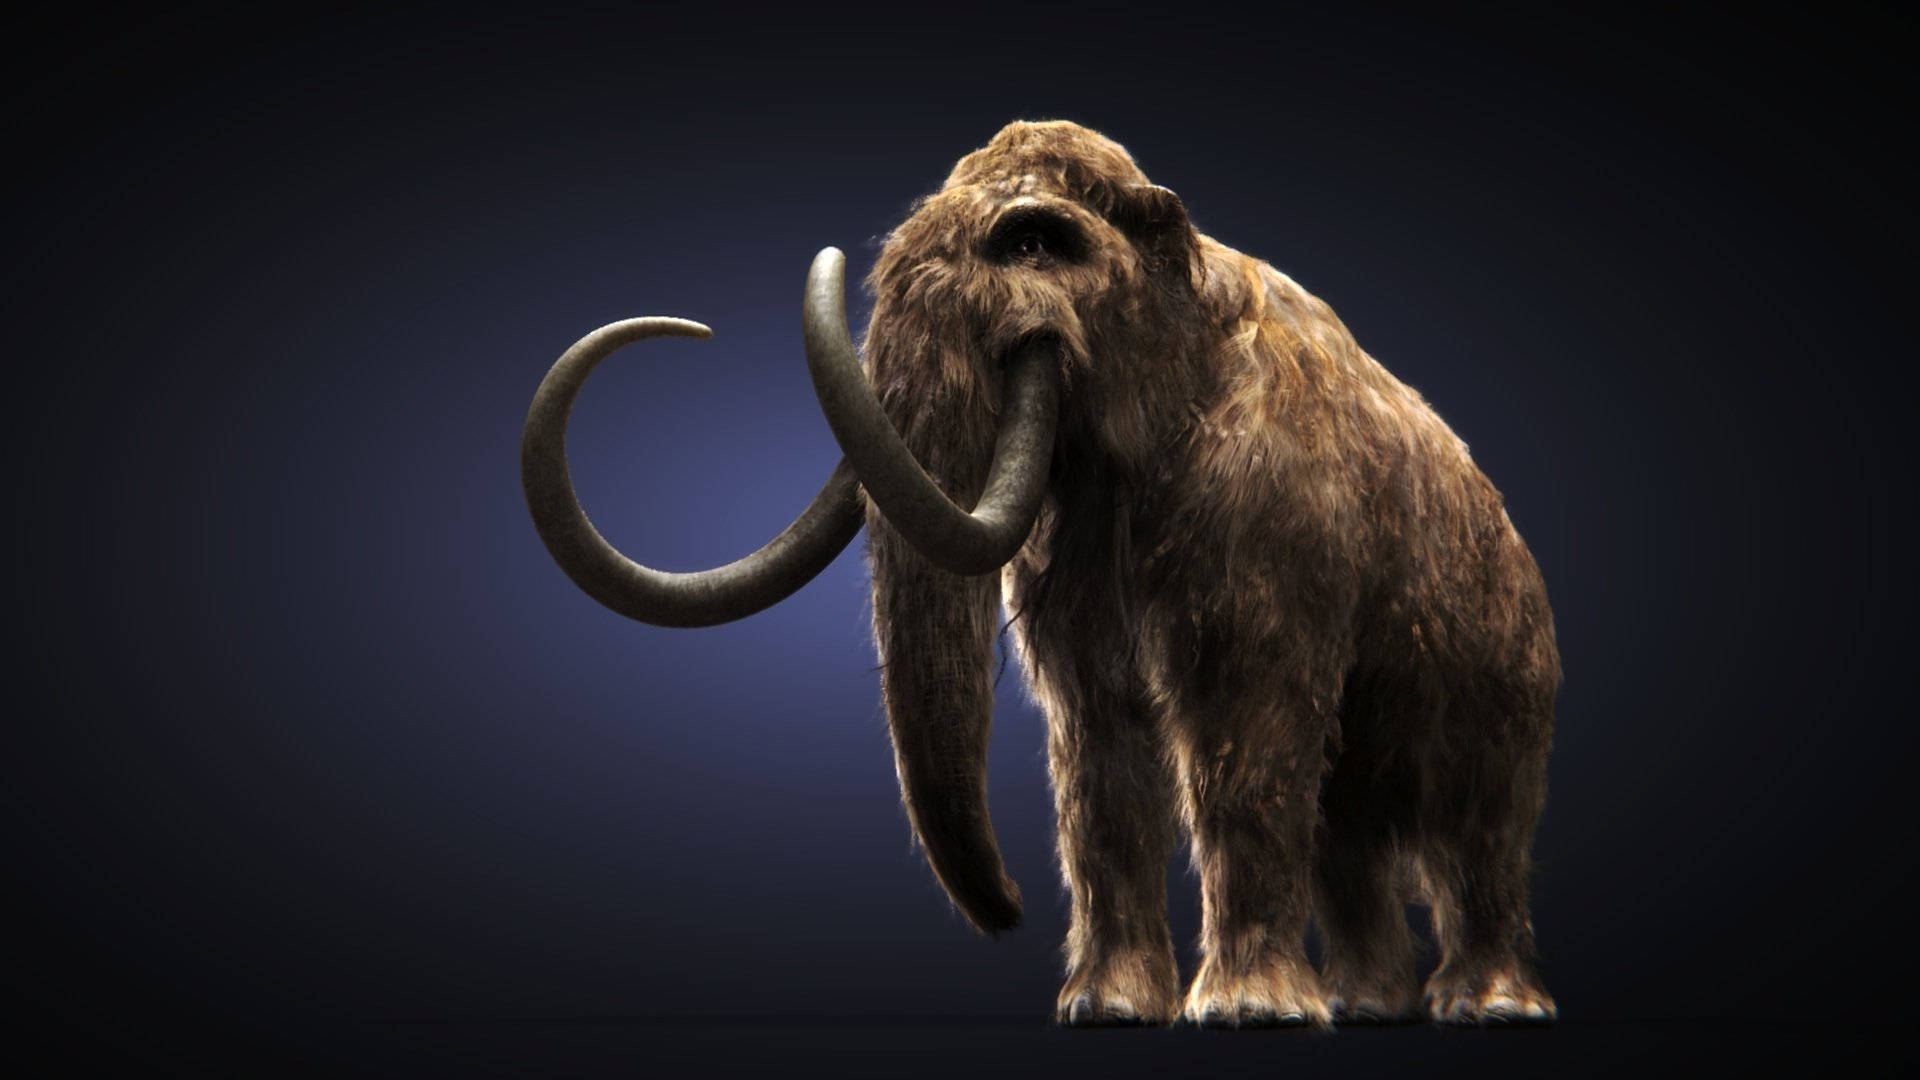 Mammoth In 3d Complete With All The Details Making It Look Realistic